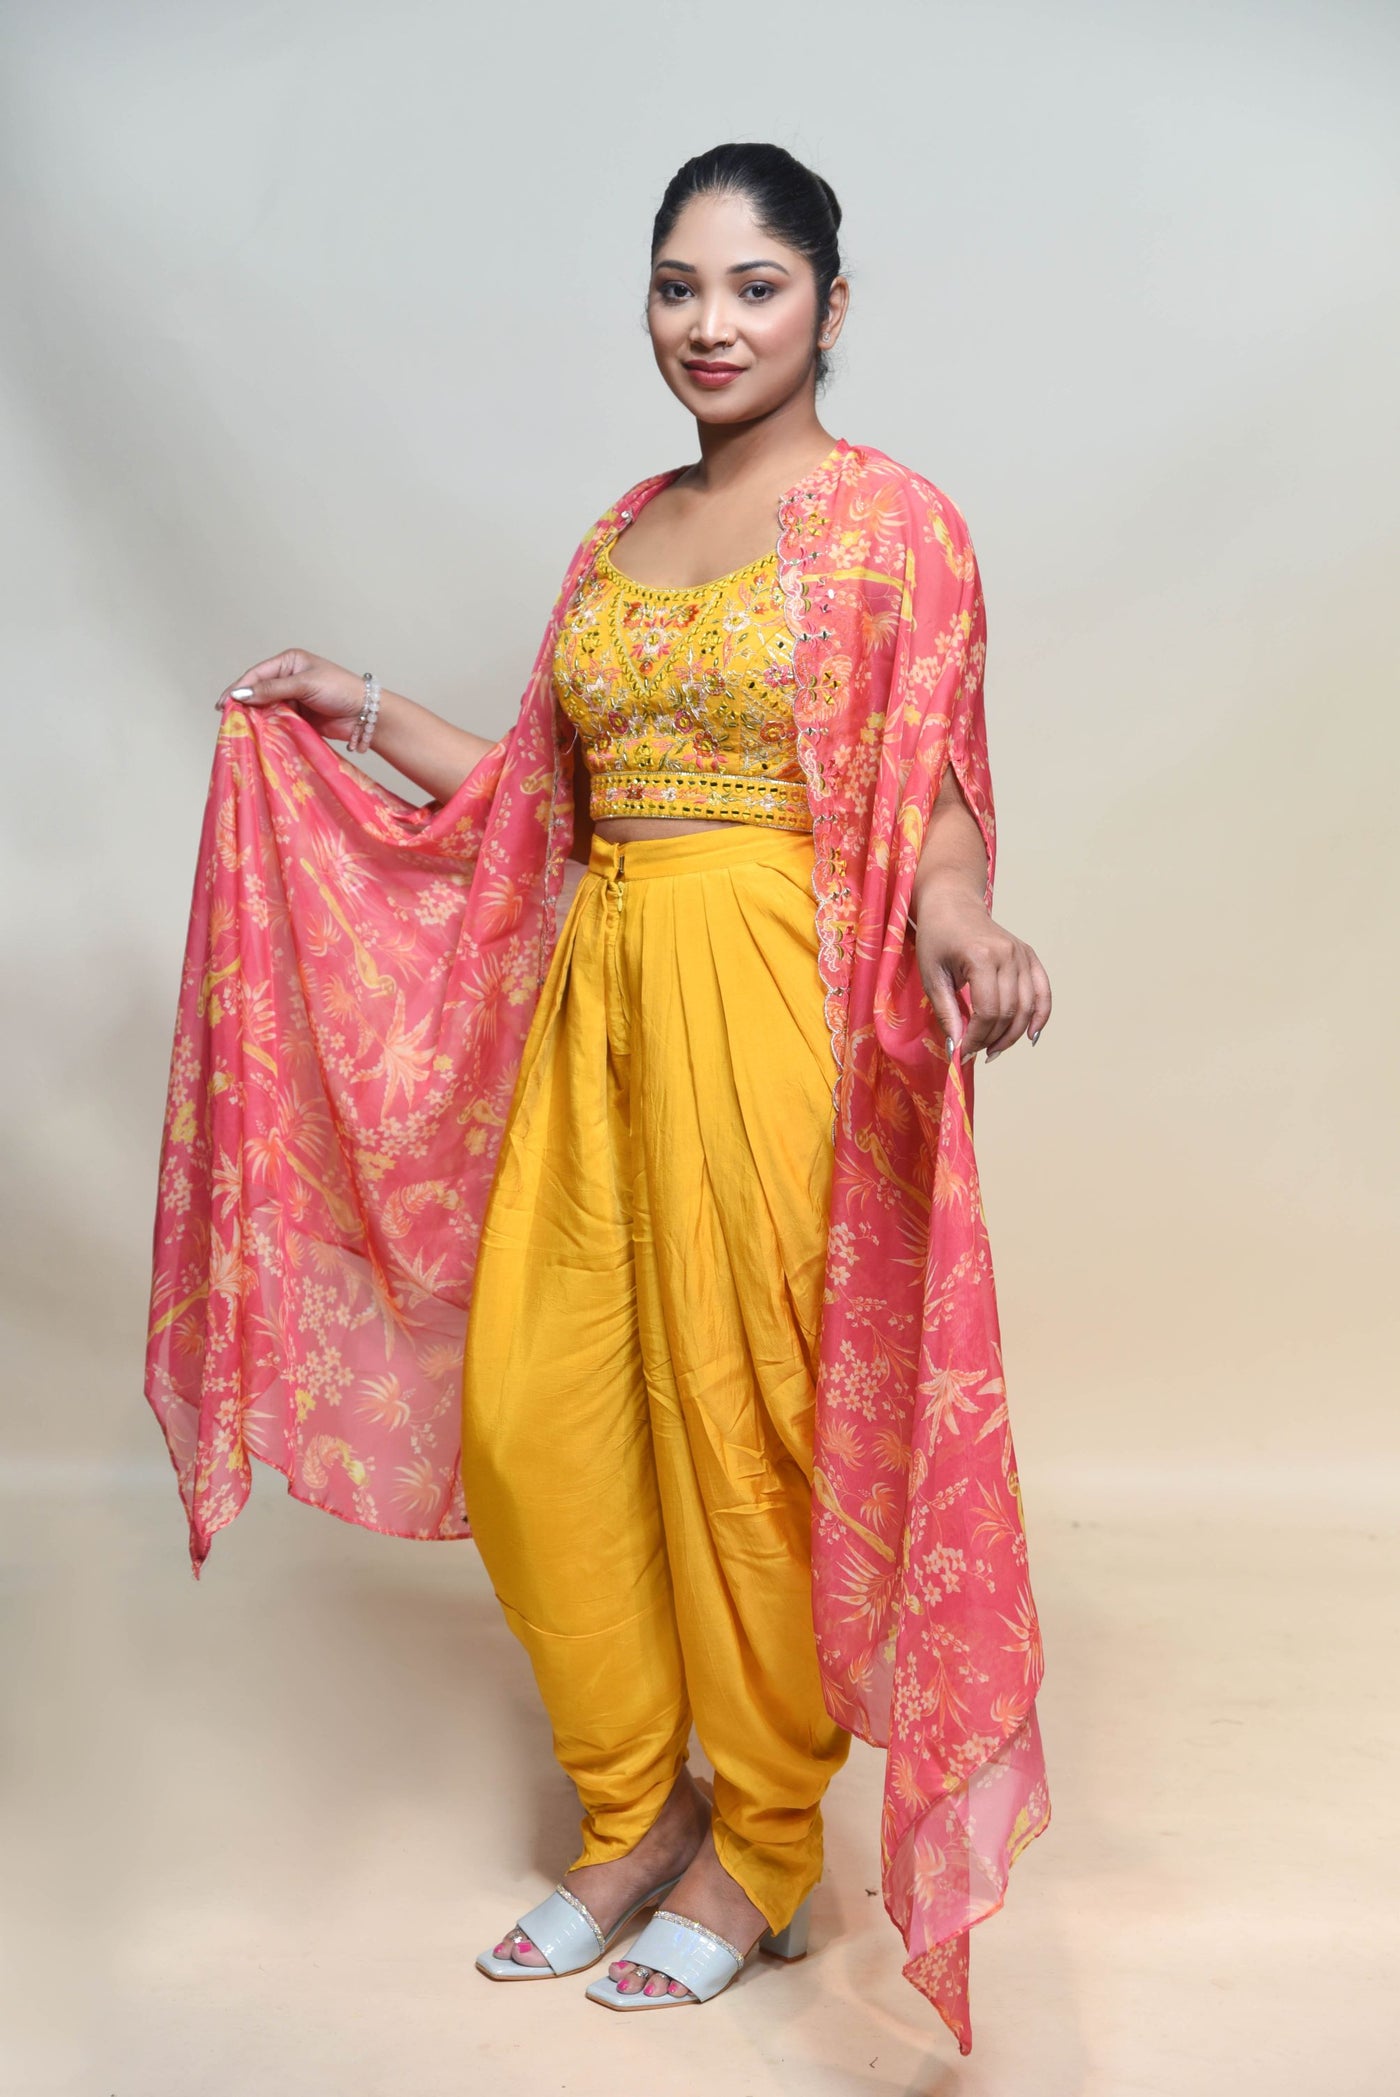 Stylish & #Trendy #Dhoti Set for Modern Day #Women! #MISI #Redefined  #Fashion #Style #SpringSu… | Fashion design clothes, Stylish dress book,  Simple trendy outfits